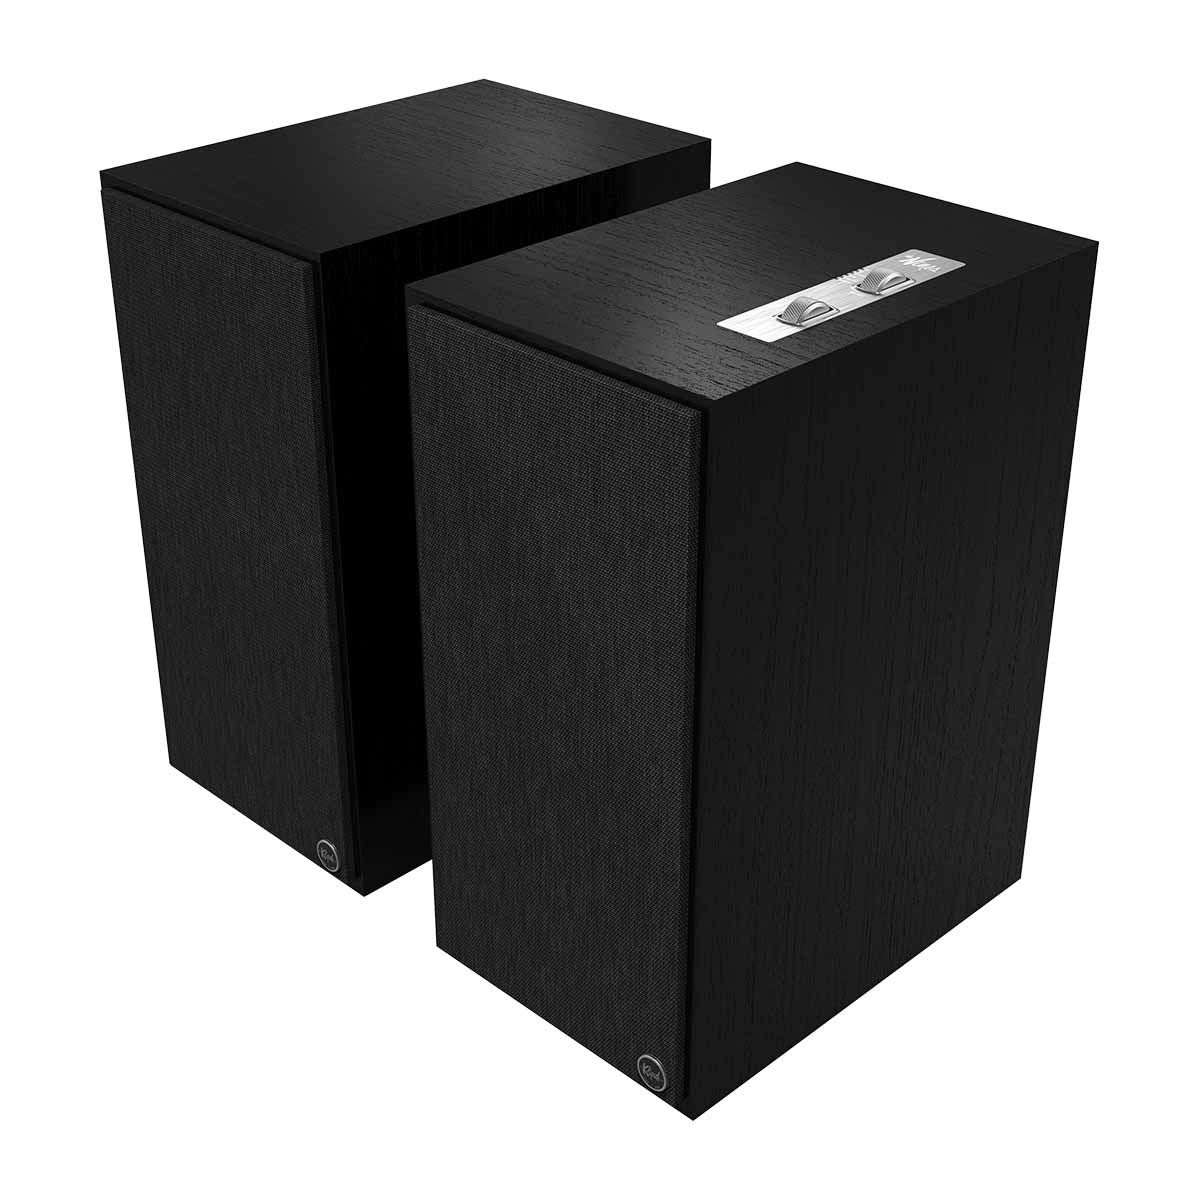 Klipsch The Nines Powered Speakers - Pair - black angled front view with grille